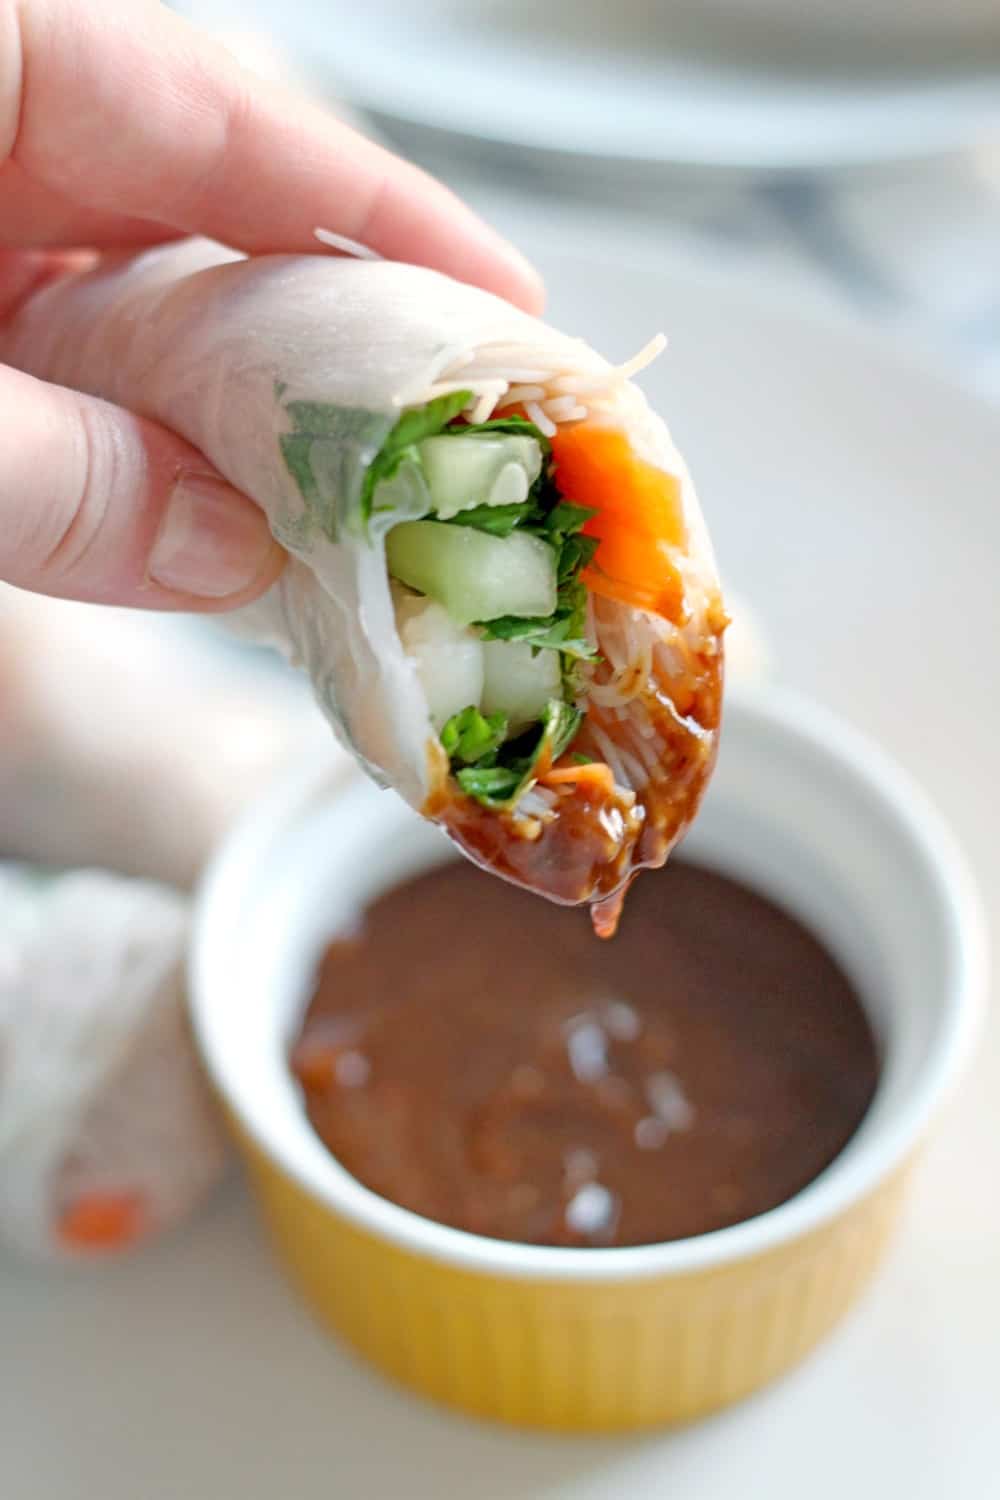 A light skinned hand holds a spring roll that has been cut in half up to the camera, so inside fillings are visible. The roll is partially dipped in peanut sauce and a ramekin of peanut sauce is blurred out in the background.